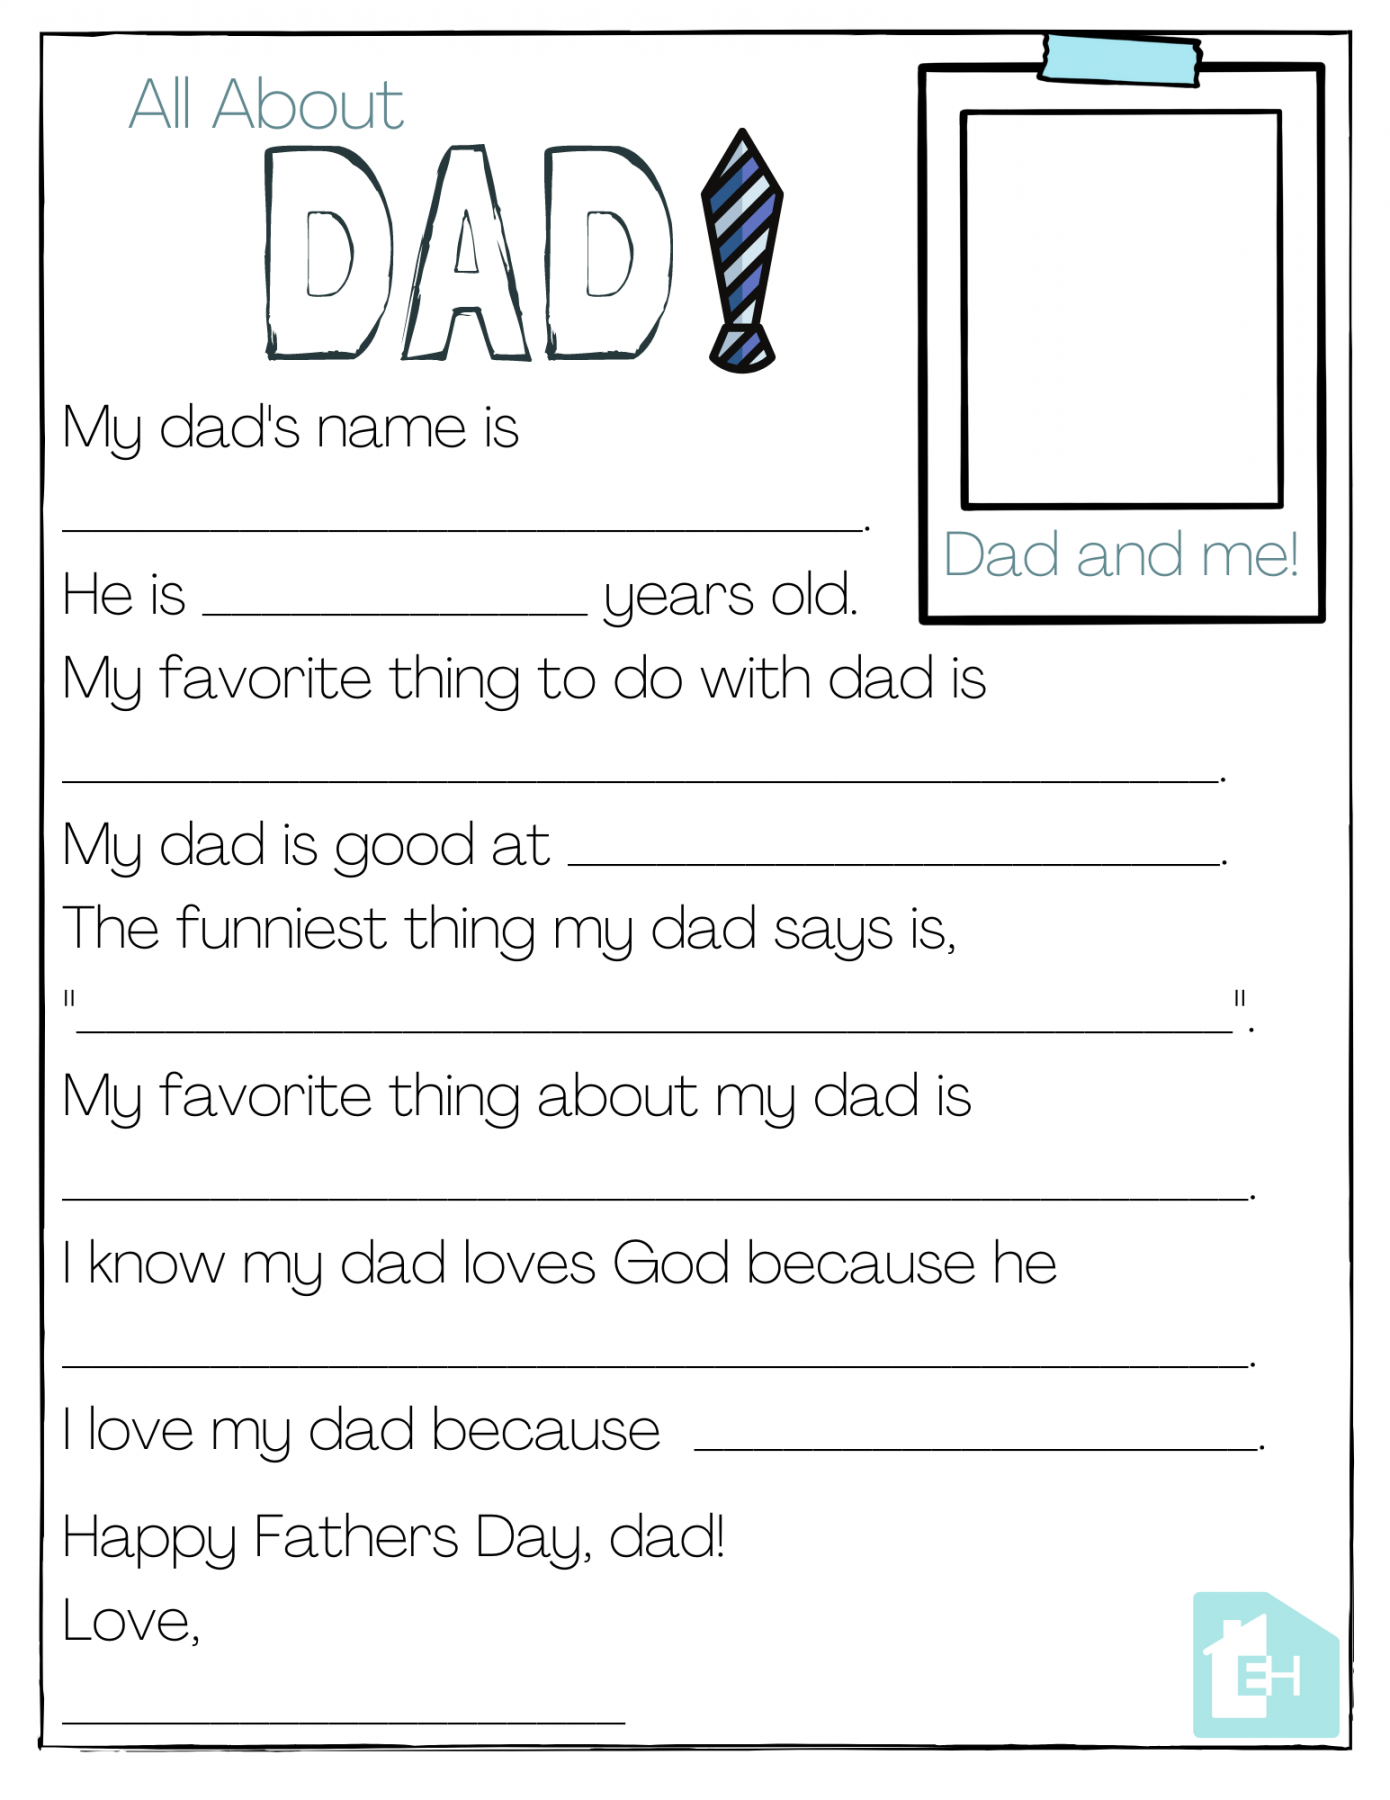 About My Dad Free Printable - Empowered Homes - FREE Printables - All About My Dad Free Printable